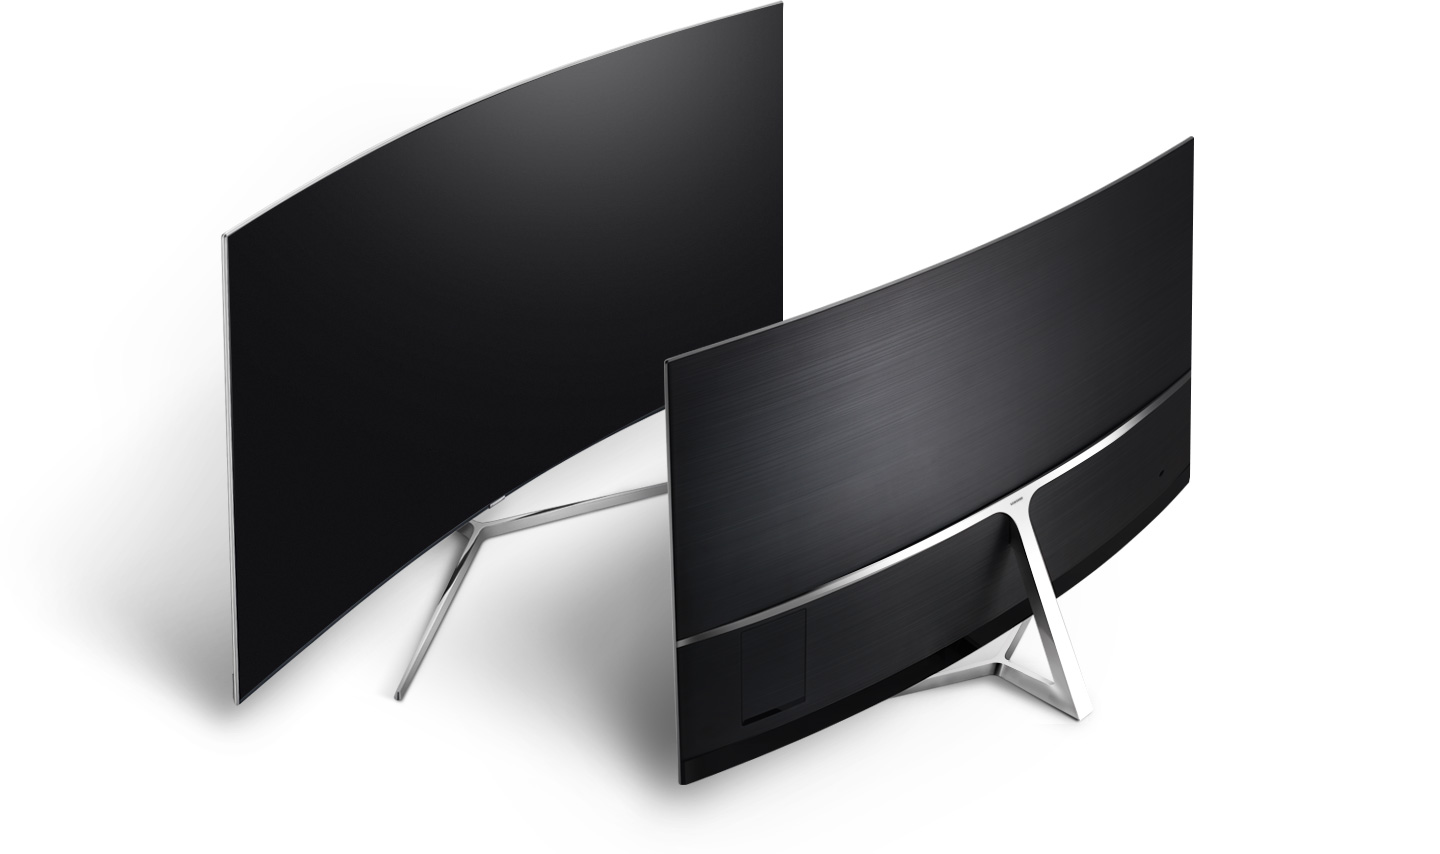 Two curved Samsung TVs are facing each other and one shows streamlined clean back design. 